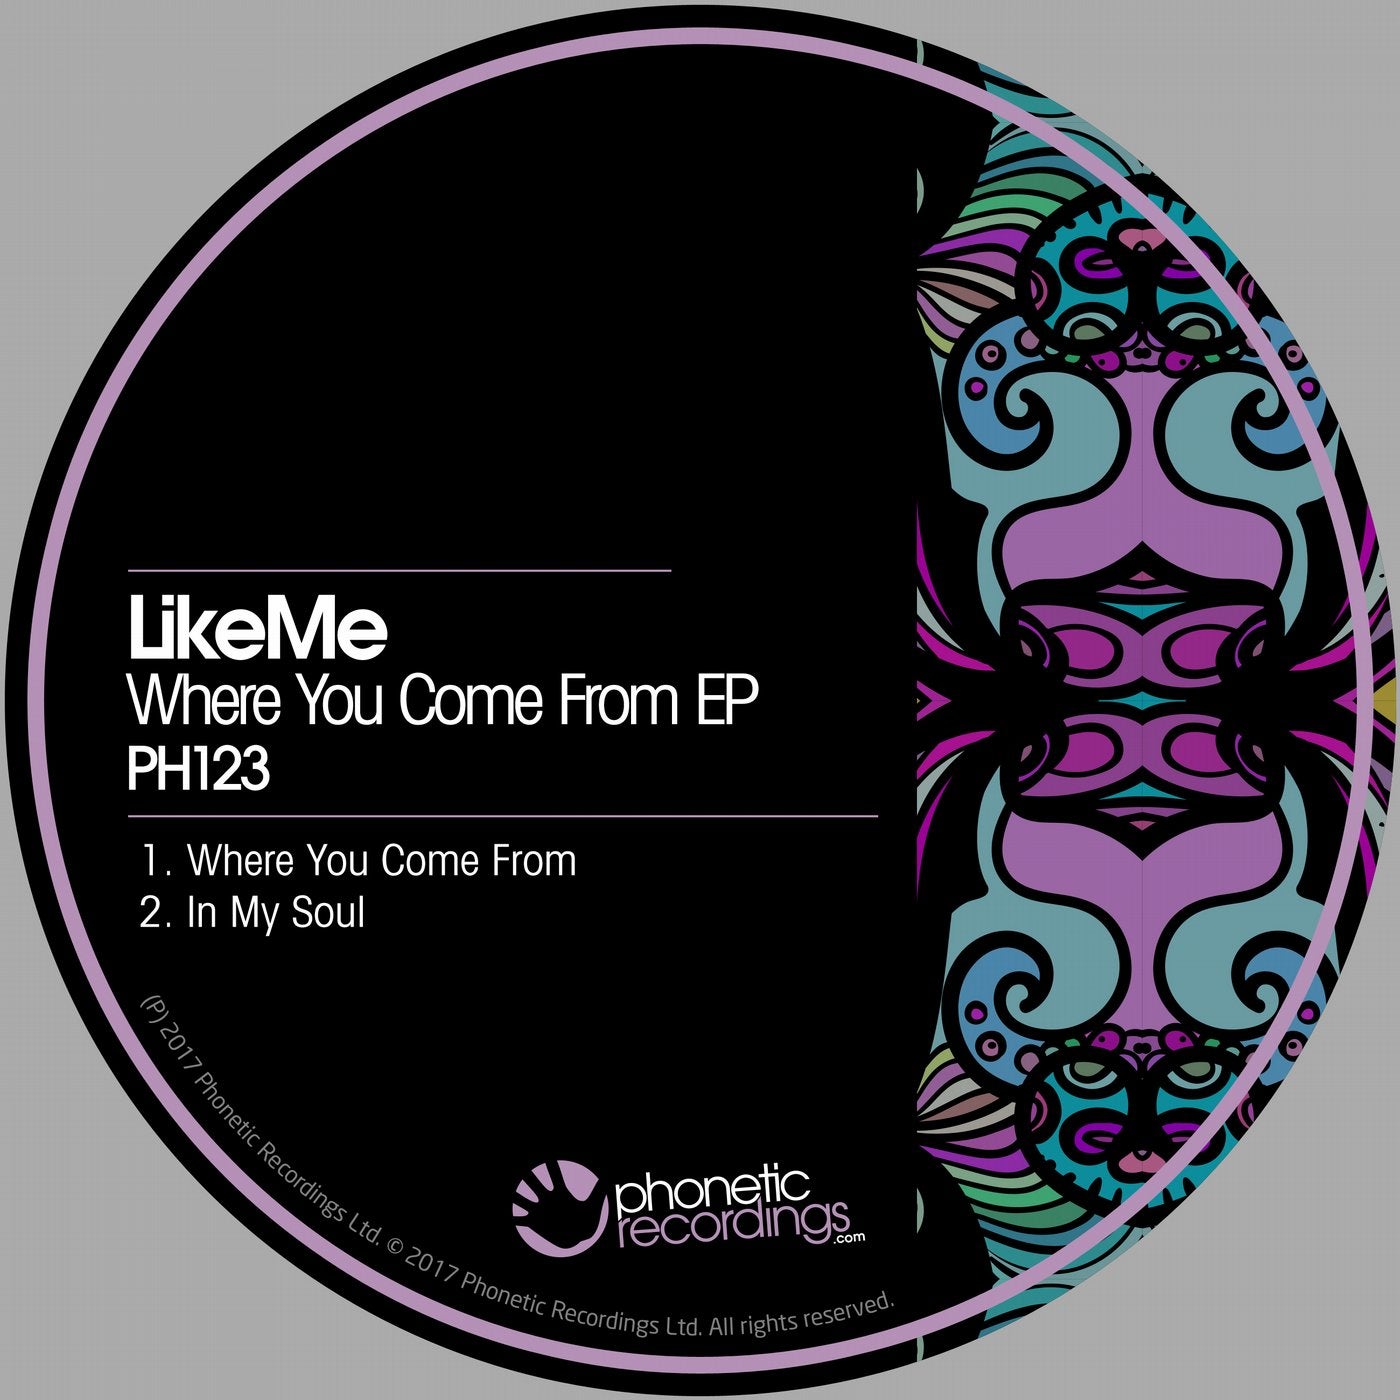 Where You Come From EP